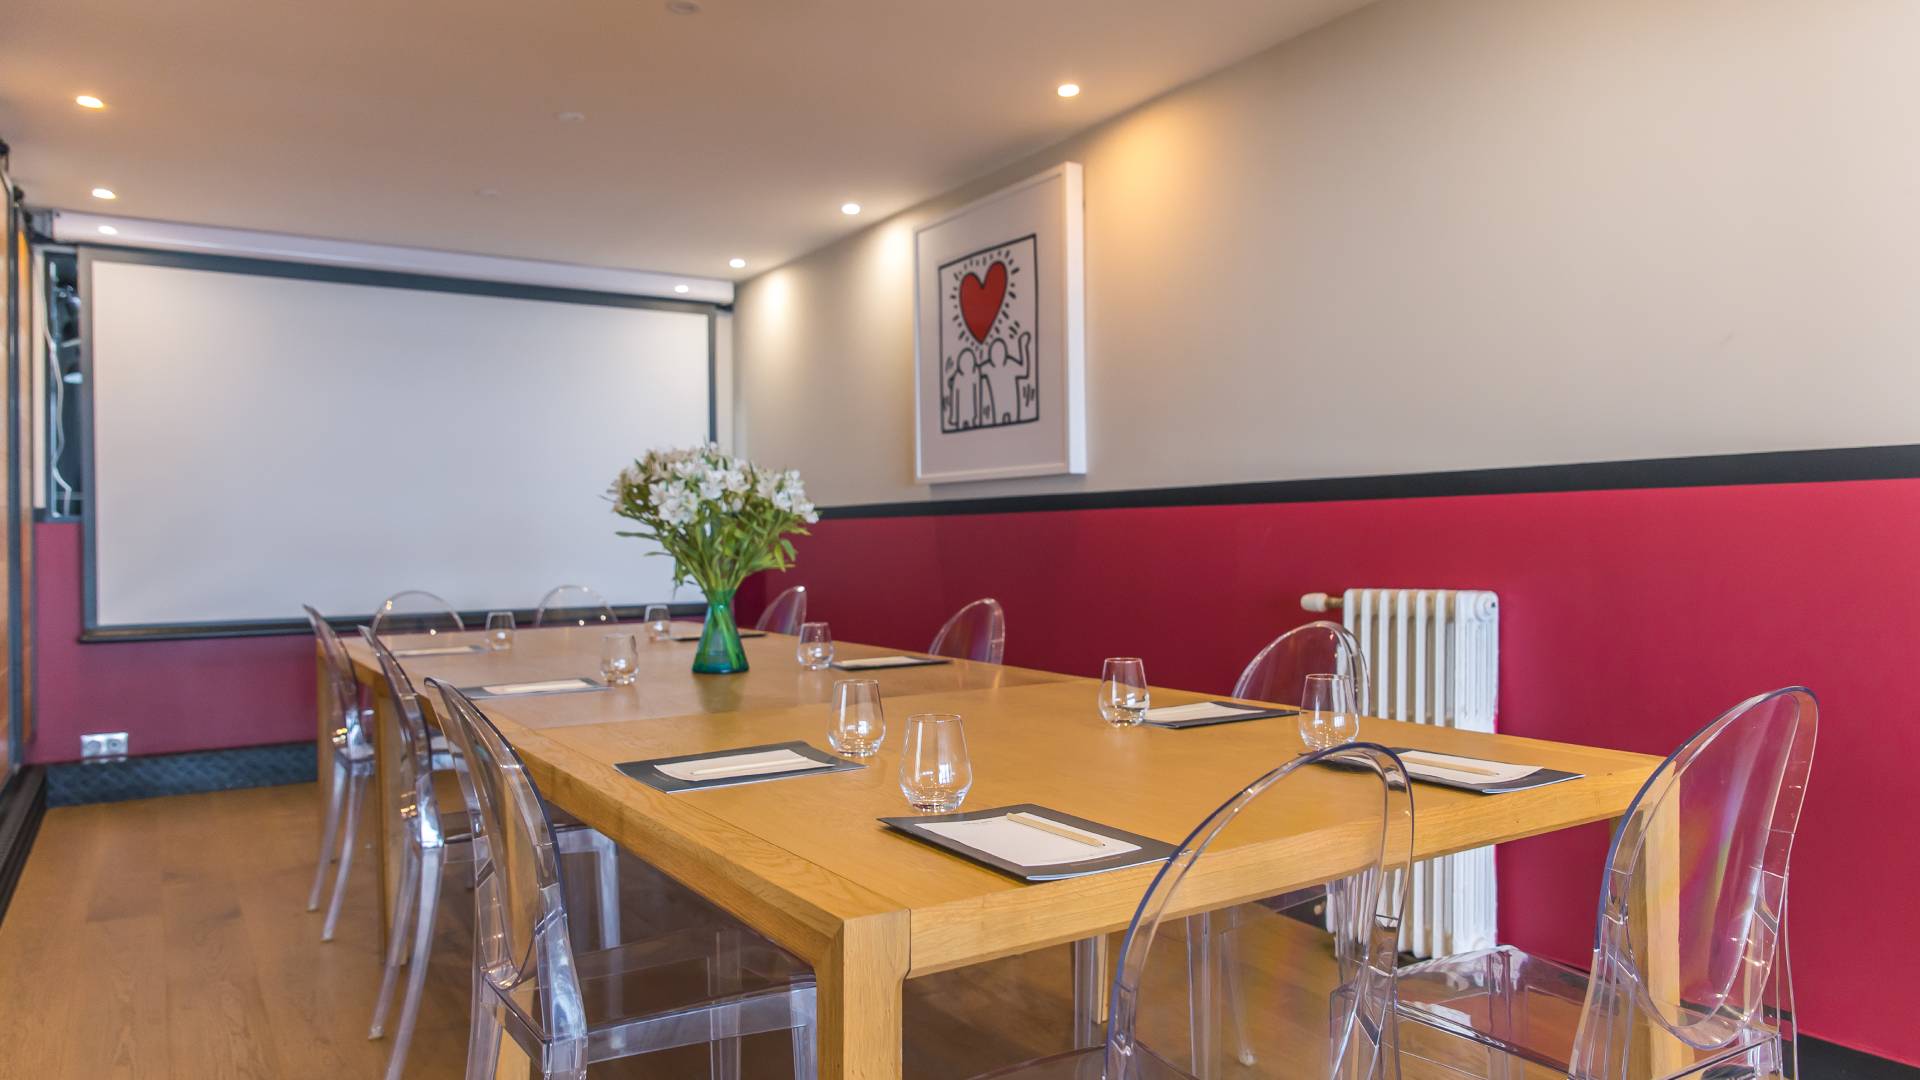 meeting room with red wall and modern art decoration - seminars in brittany